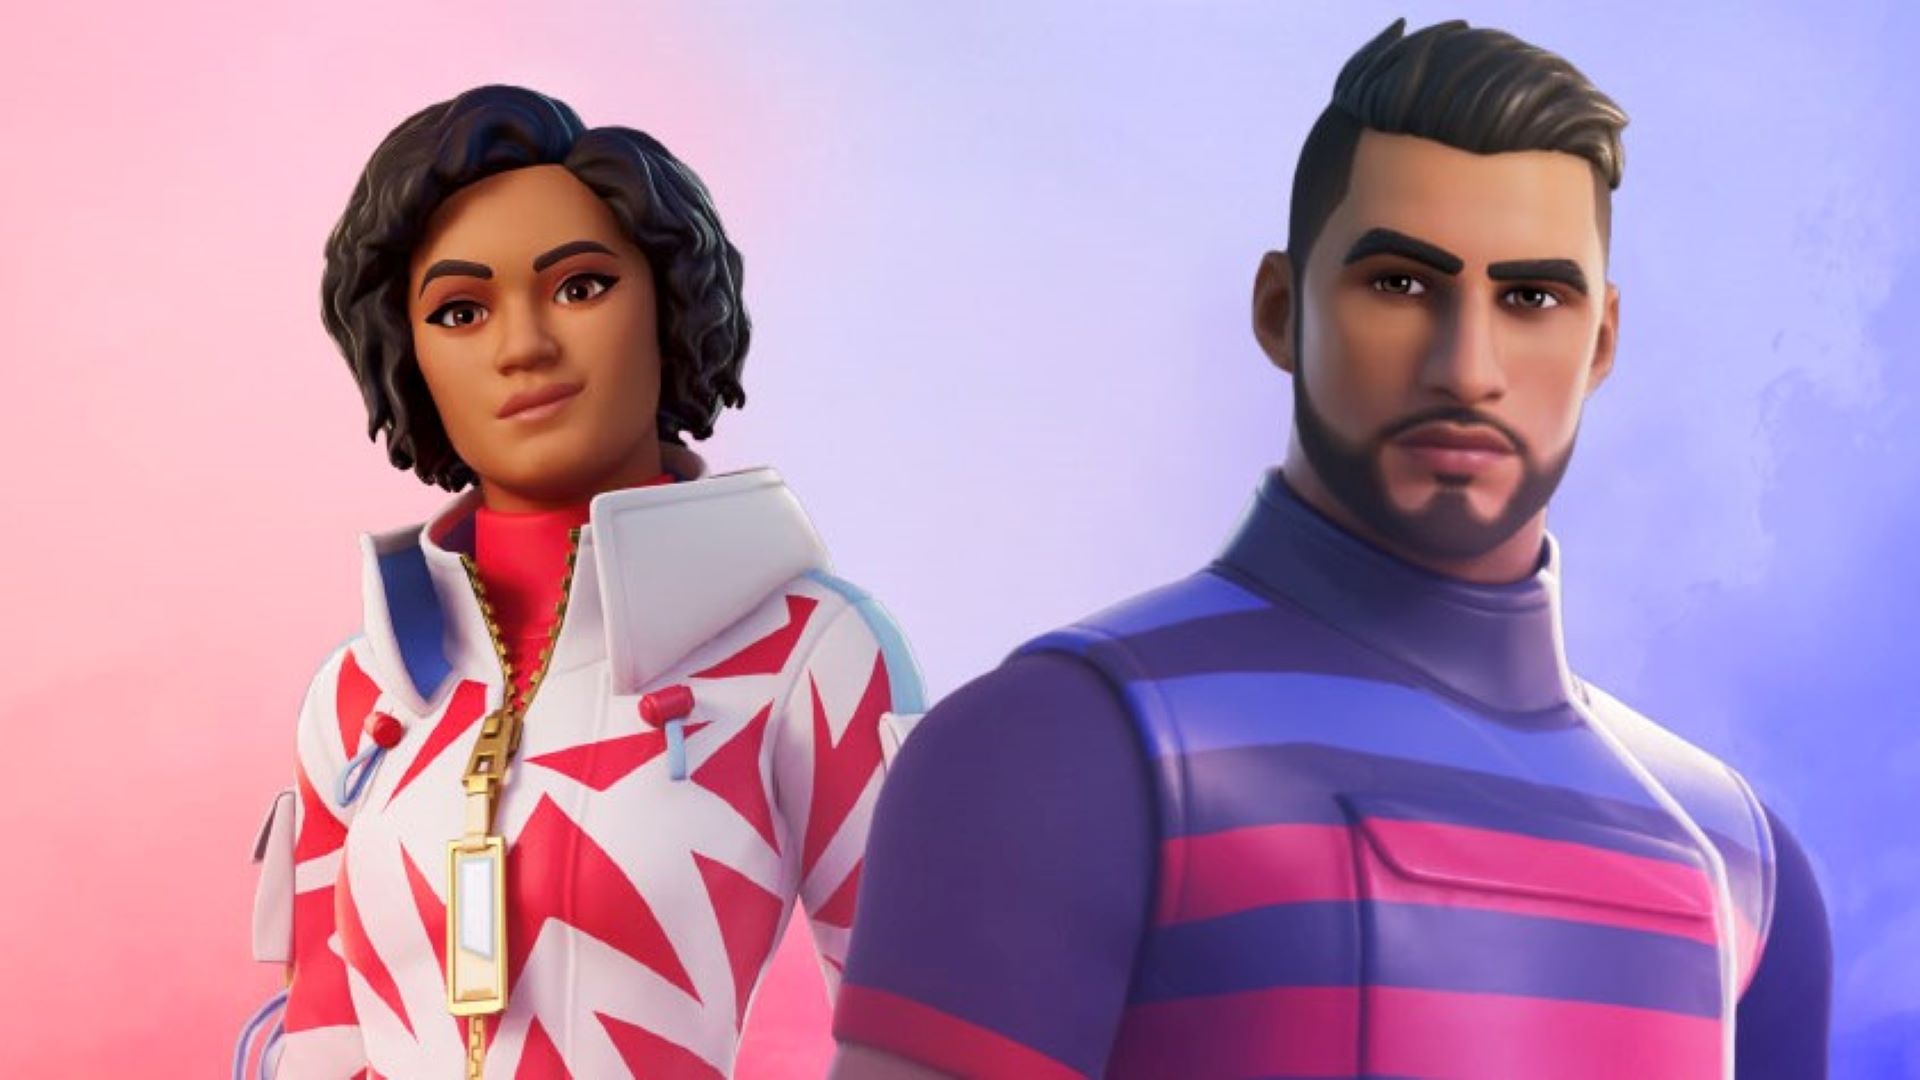 Fortnite skins bring football outfits in time for the FIFA World Cup